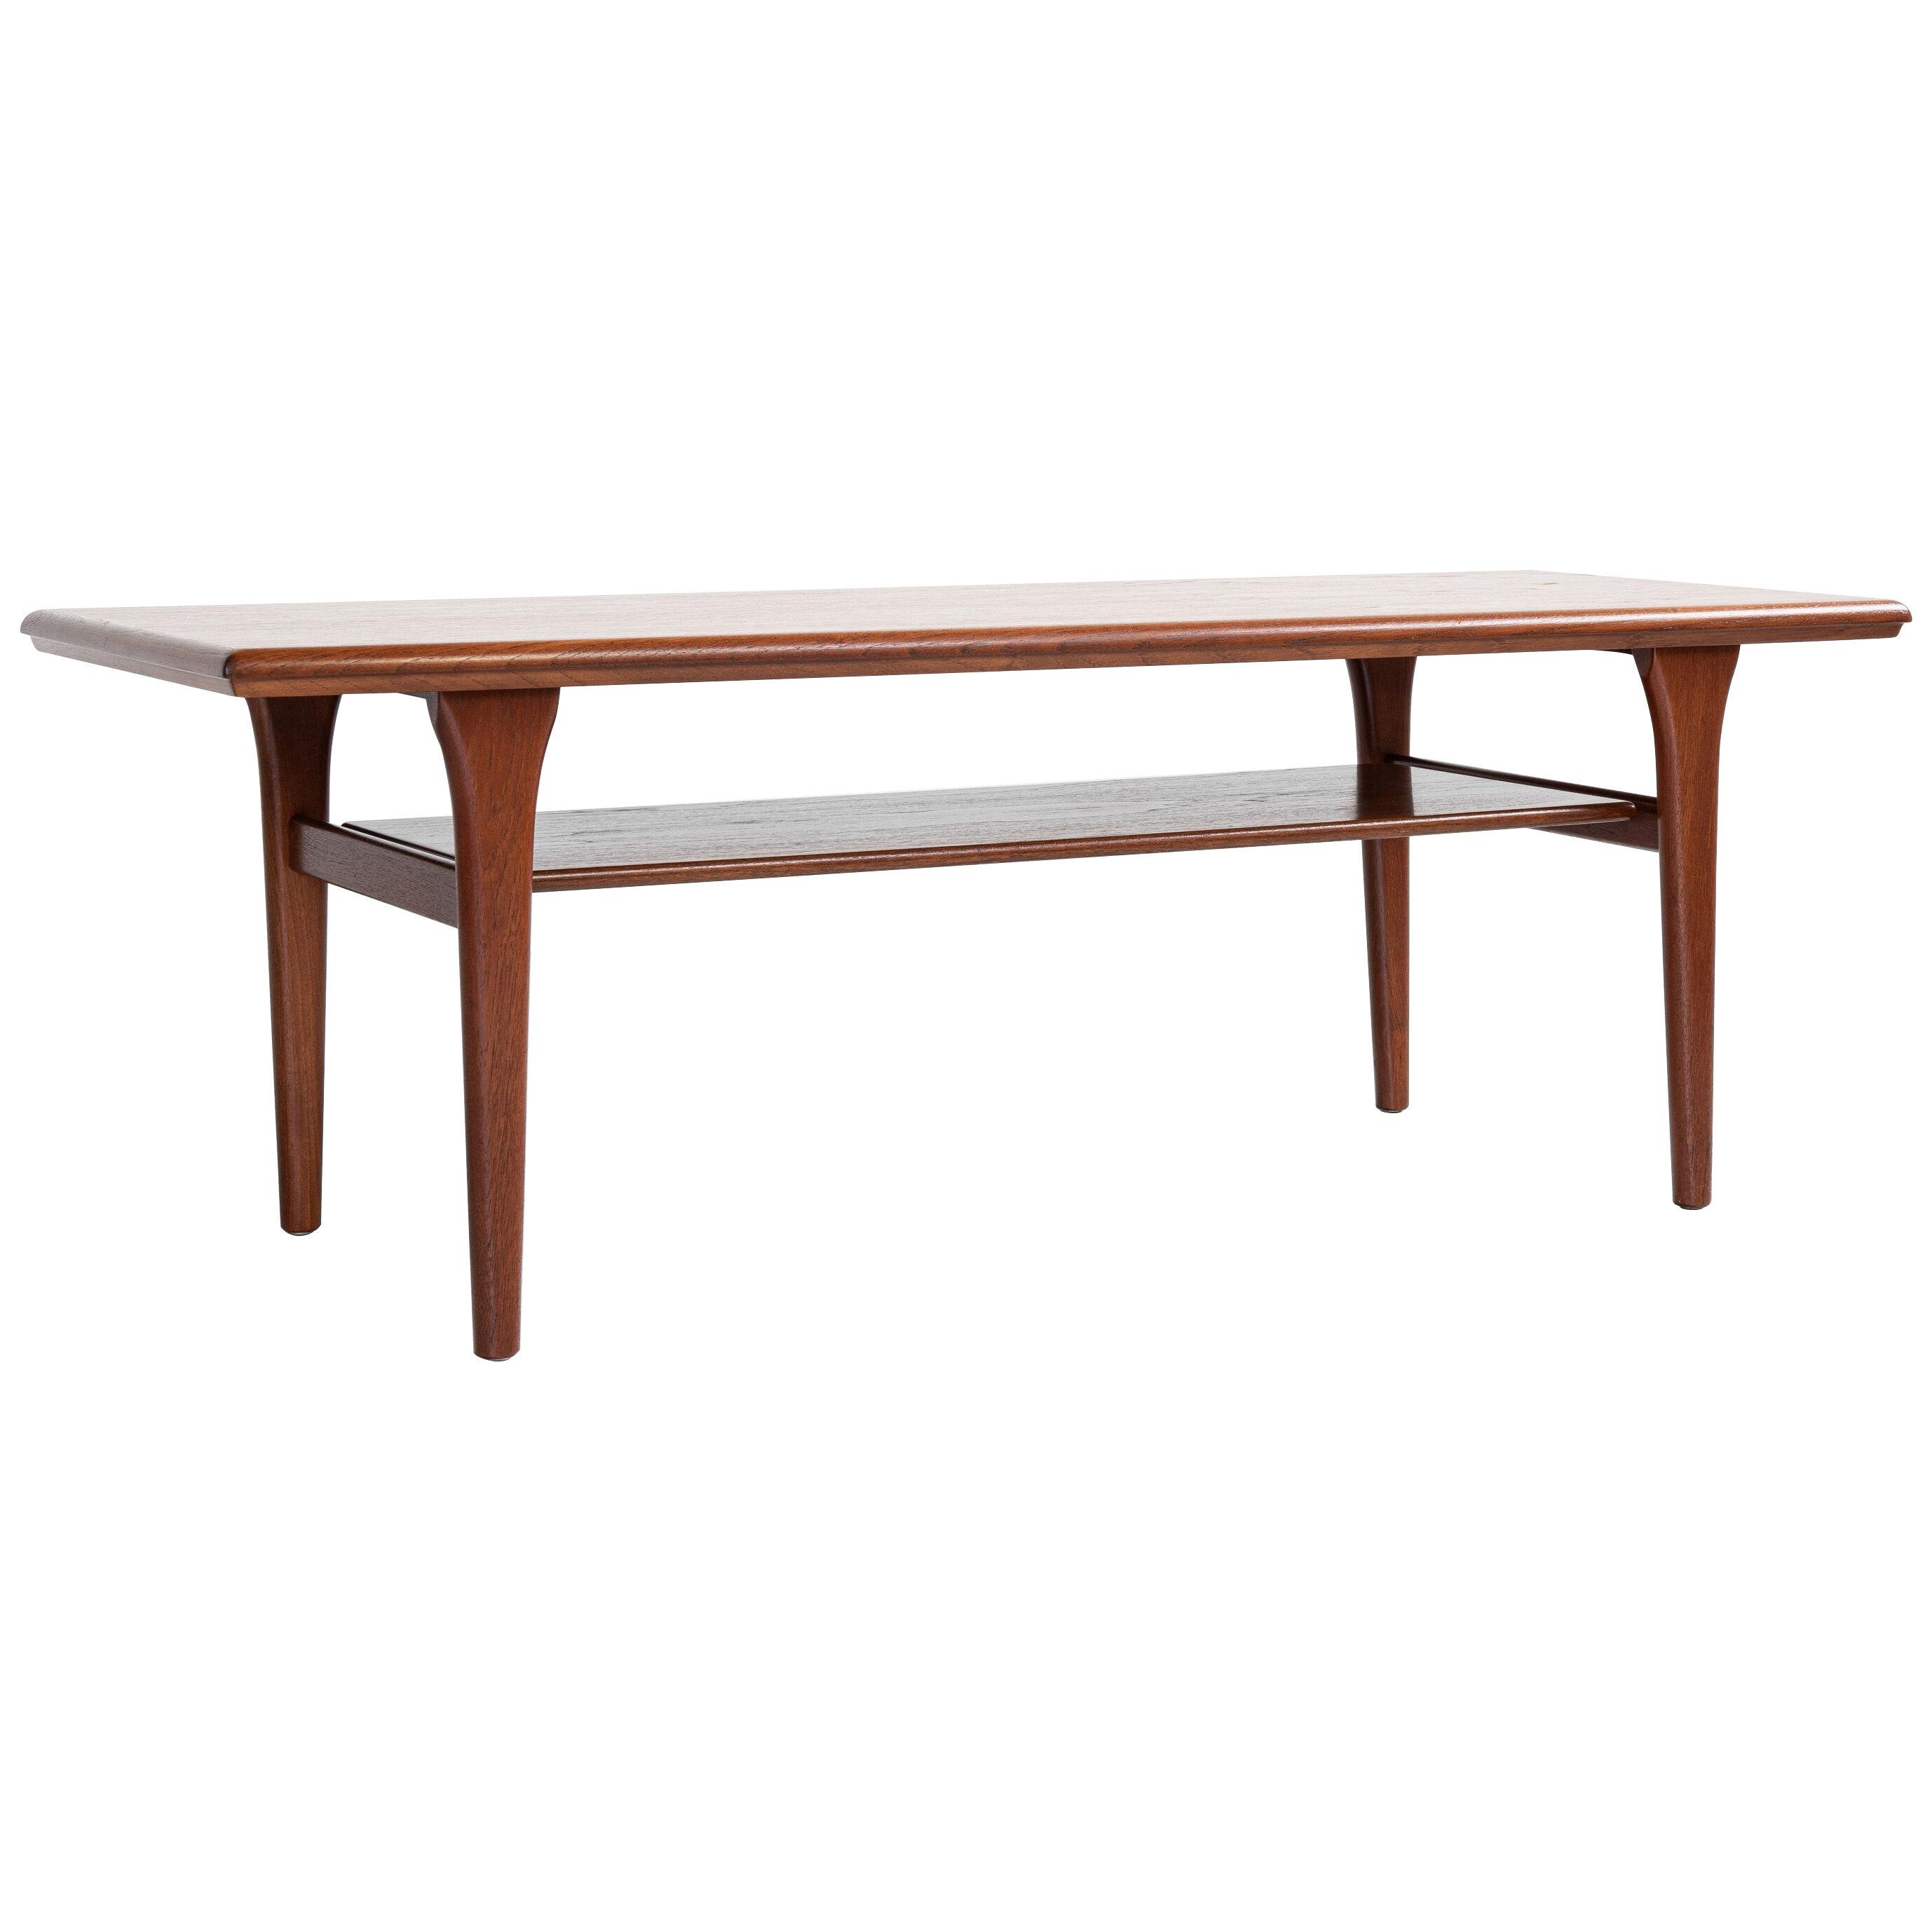 Midcentury Danish coffee table in teak with 2 levels 1960s